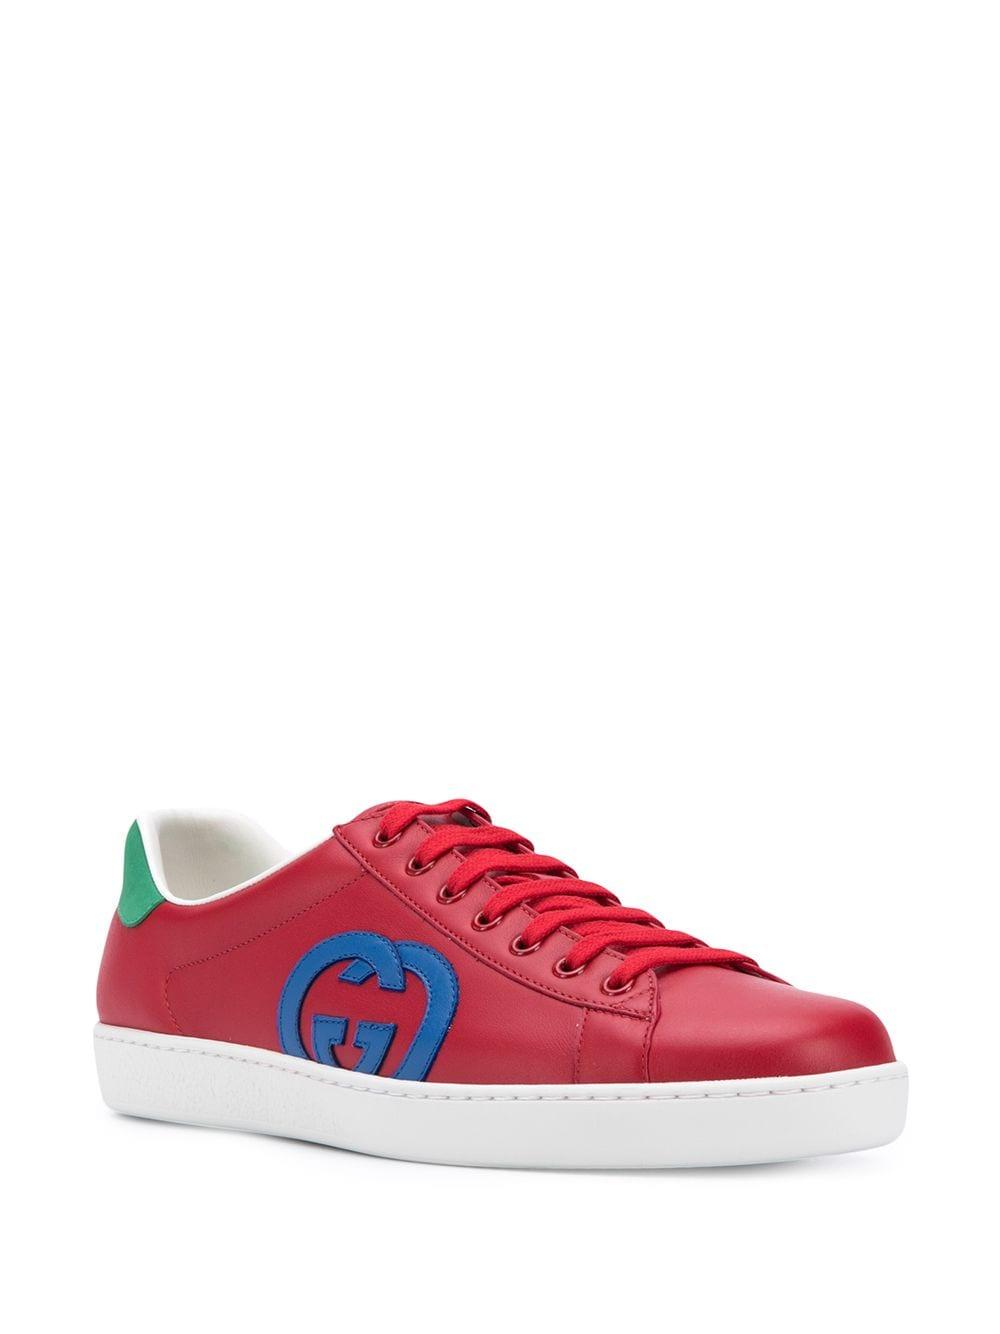 Gucci Leather Interlocking G Ace Sneakers in Red for Men - Lyst